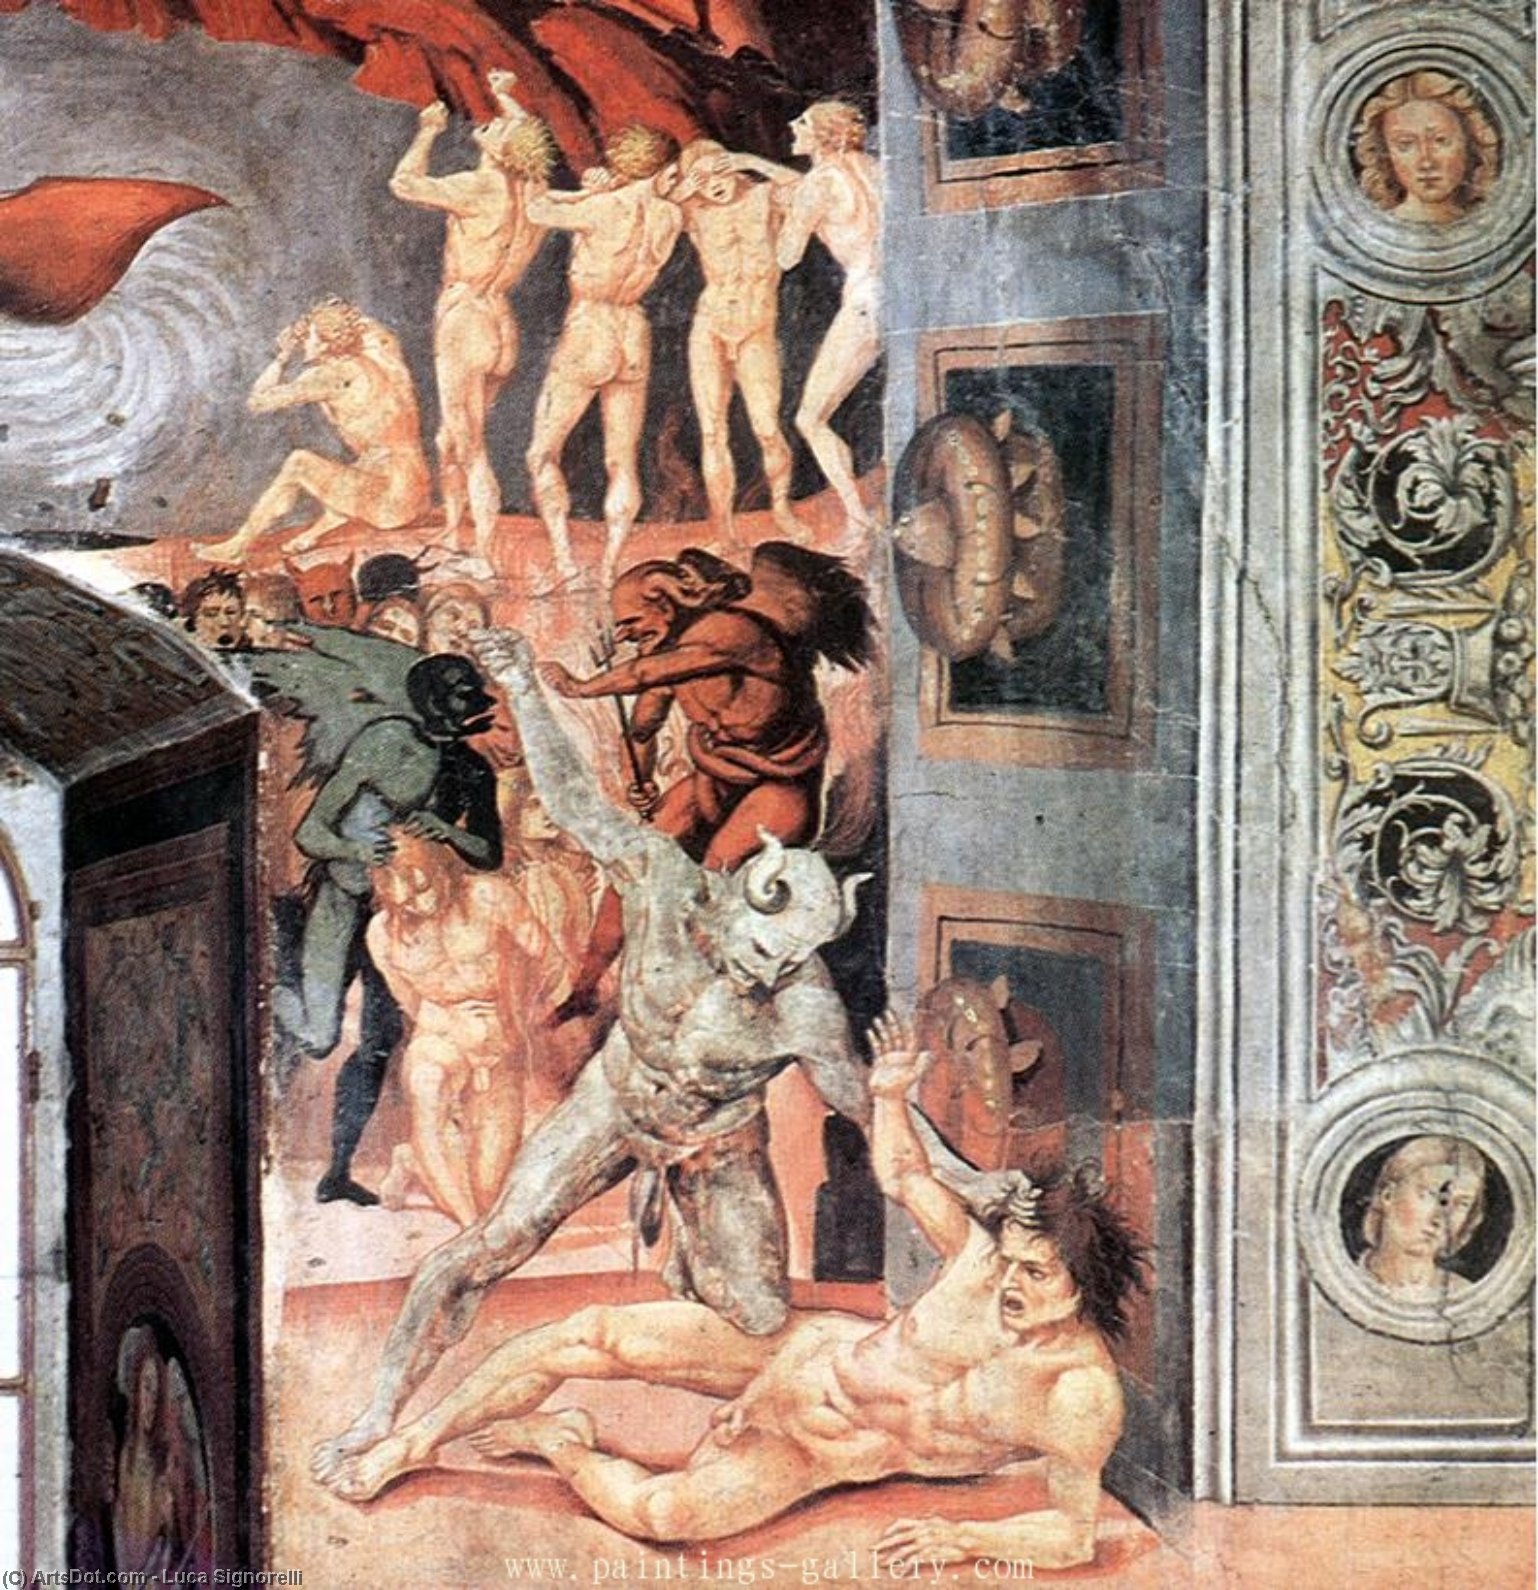 WikiOO.org - Encyclopedia of Fine Arts - Malba, Artwork Luca Signorelli - The Damned Being Plunged into Hell (detail)